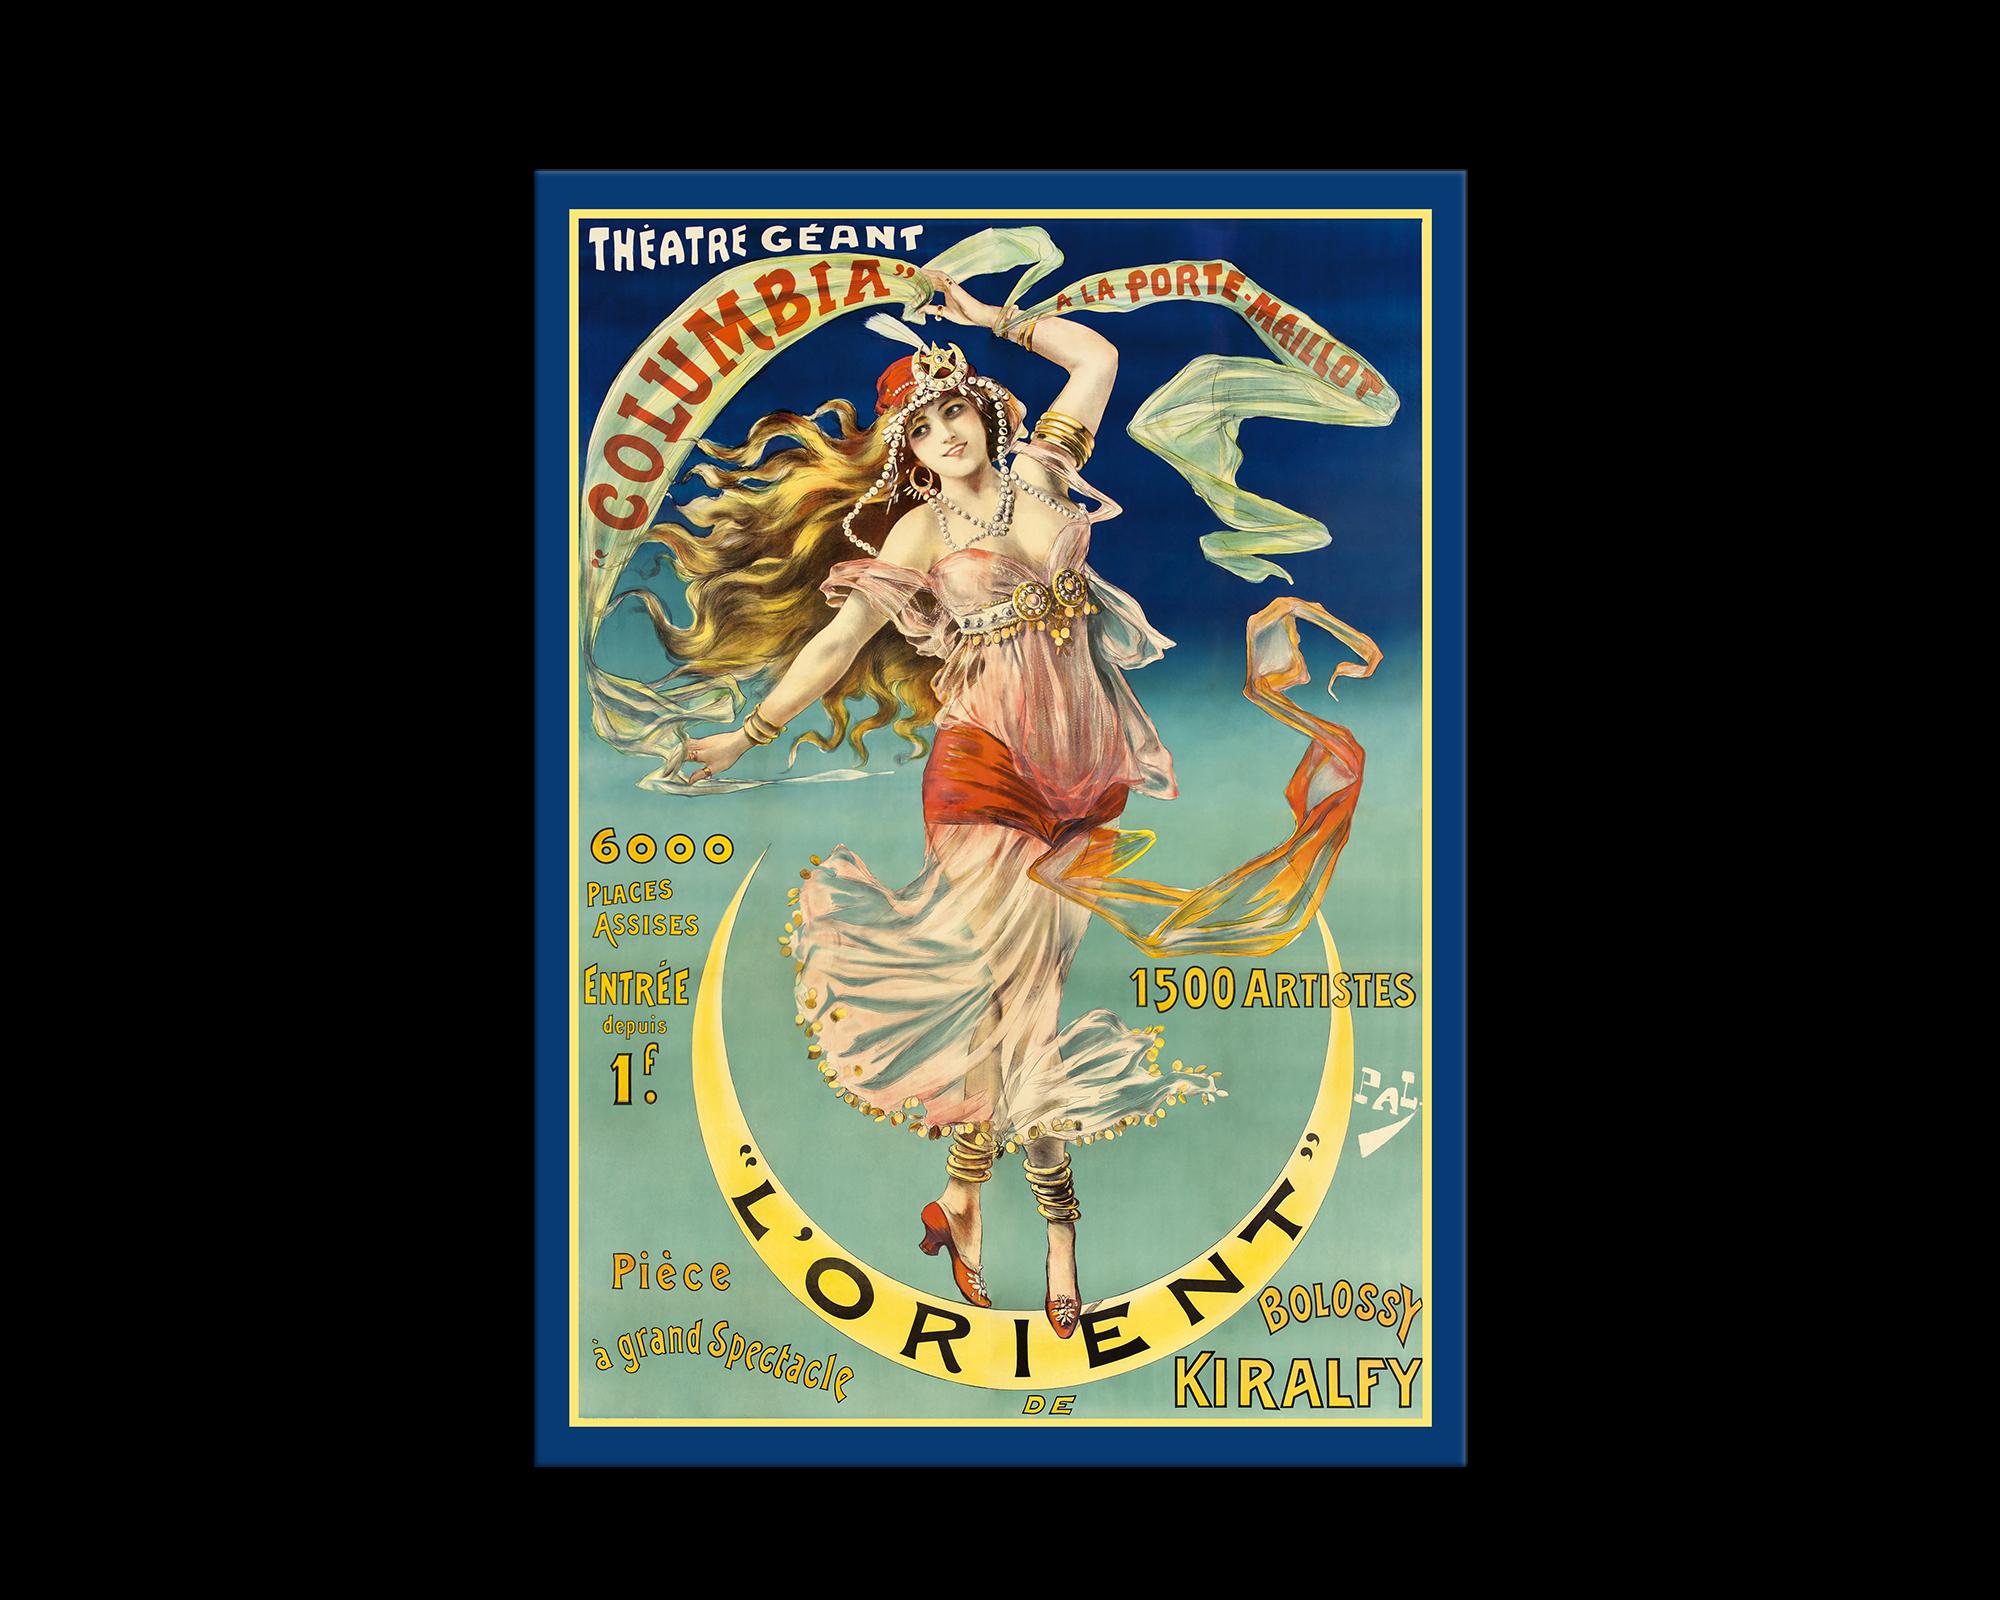 This large Belle Époque Masterpiece is a faithful yet nuanced reproduction of a Vintage Art Poster titled 